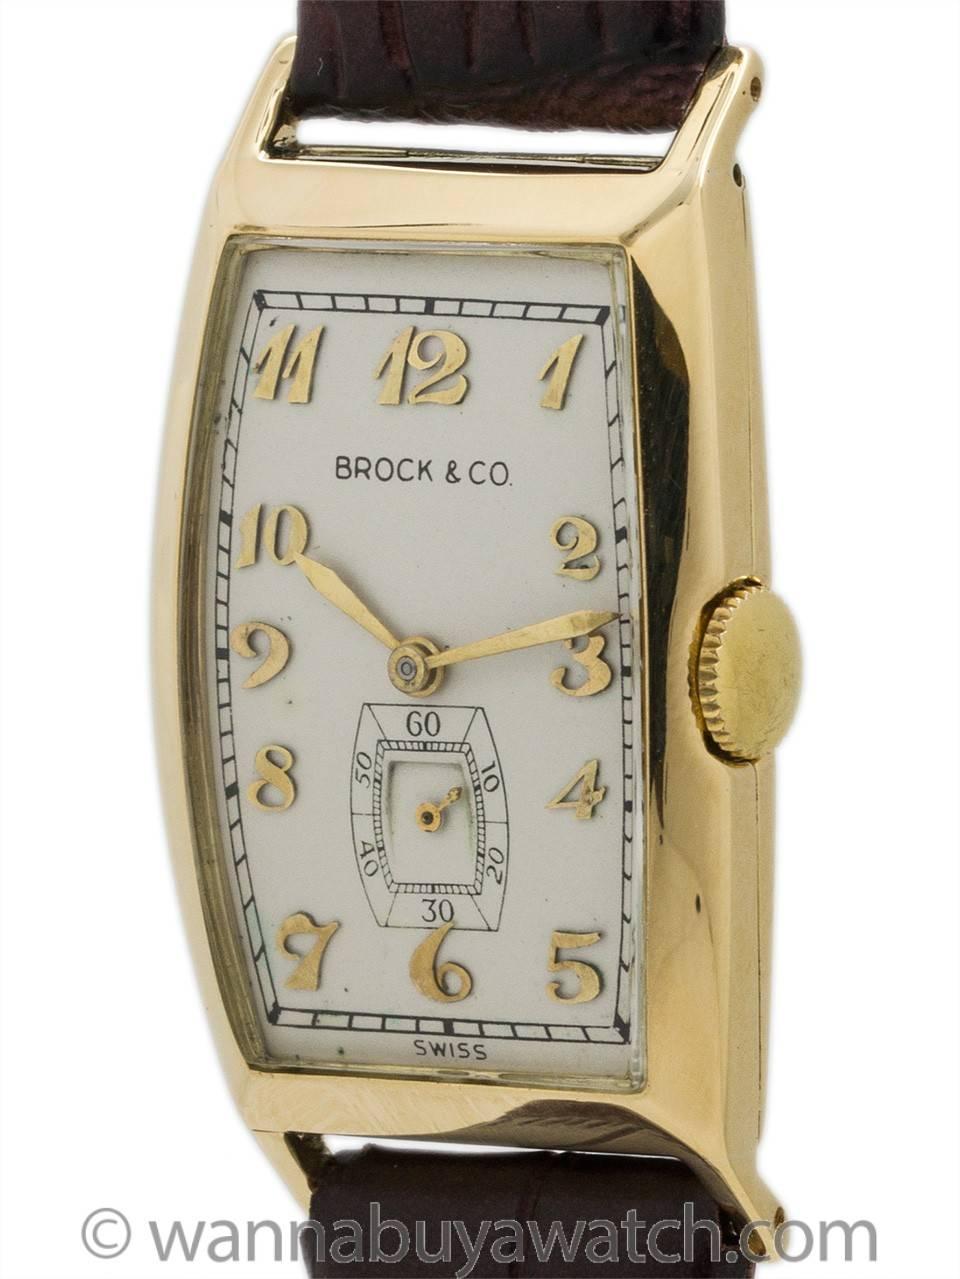 Tonneau shaped man’s gold wristwatch retailed by Brock & Co circa 1940’s. Featuring 20 x 40mm tonneau shaped case with curved mineral glass crystal, nicely restored antique white dial with gold raised arabic indexes and gilt hands. Powered by 17